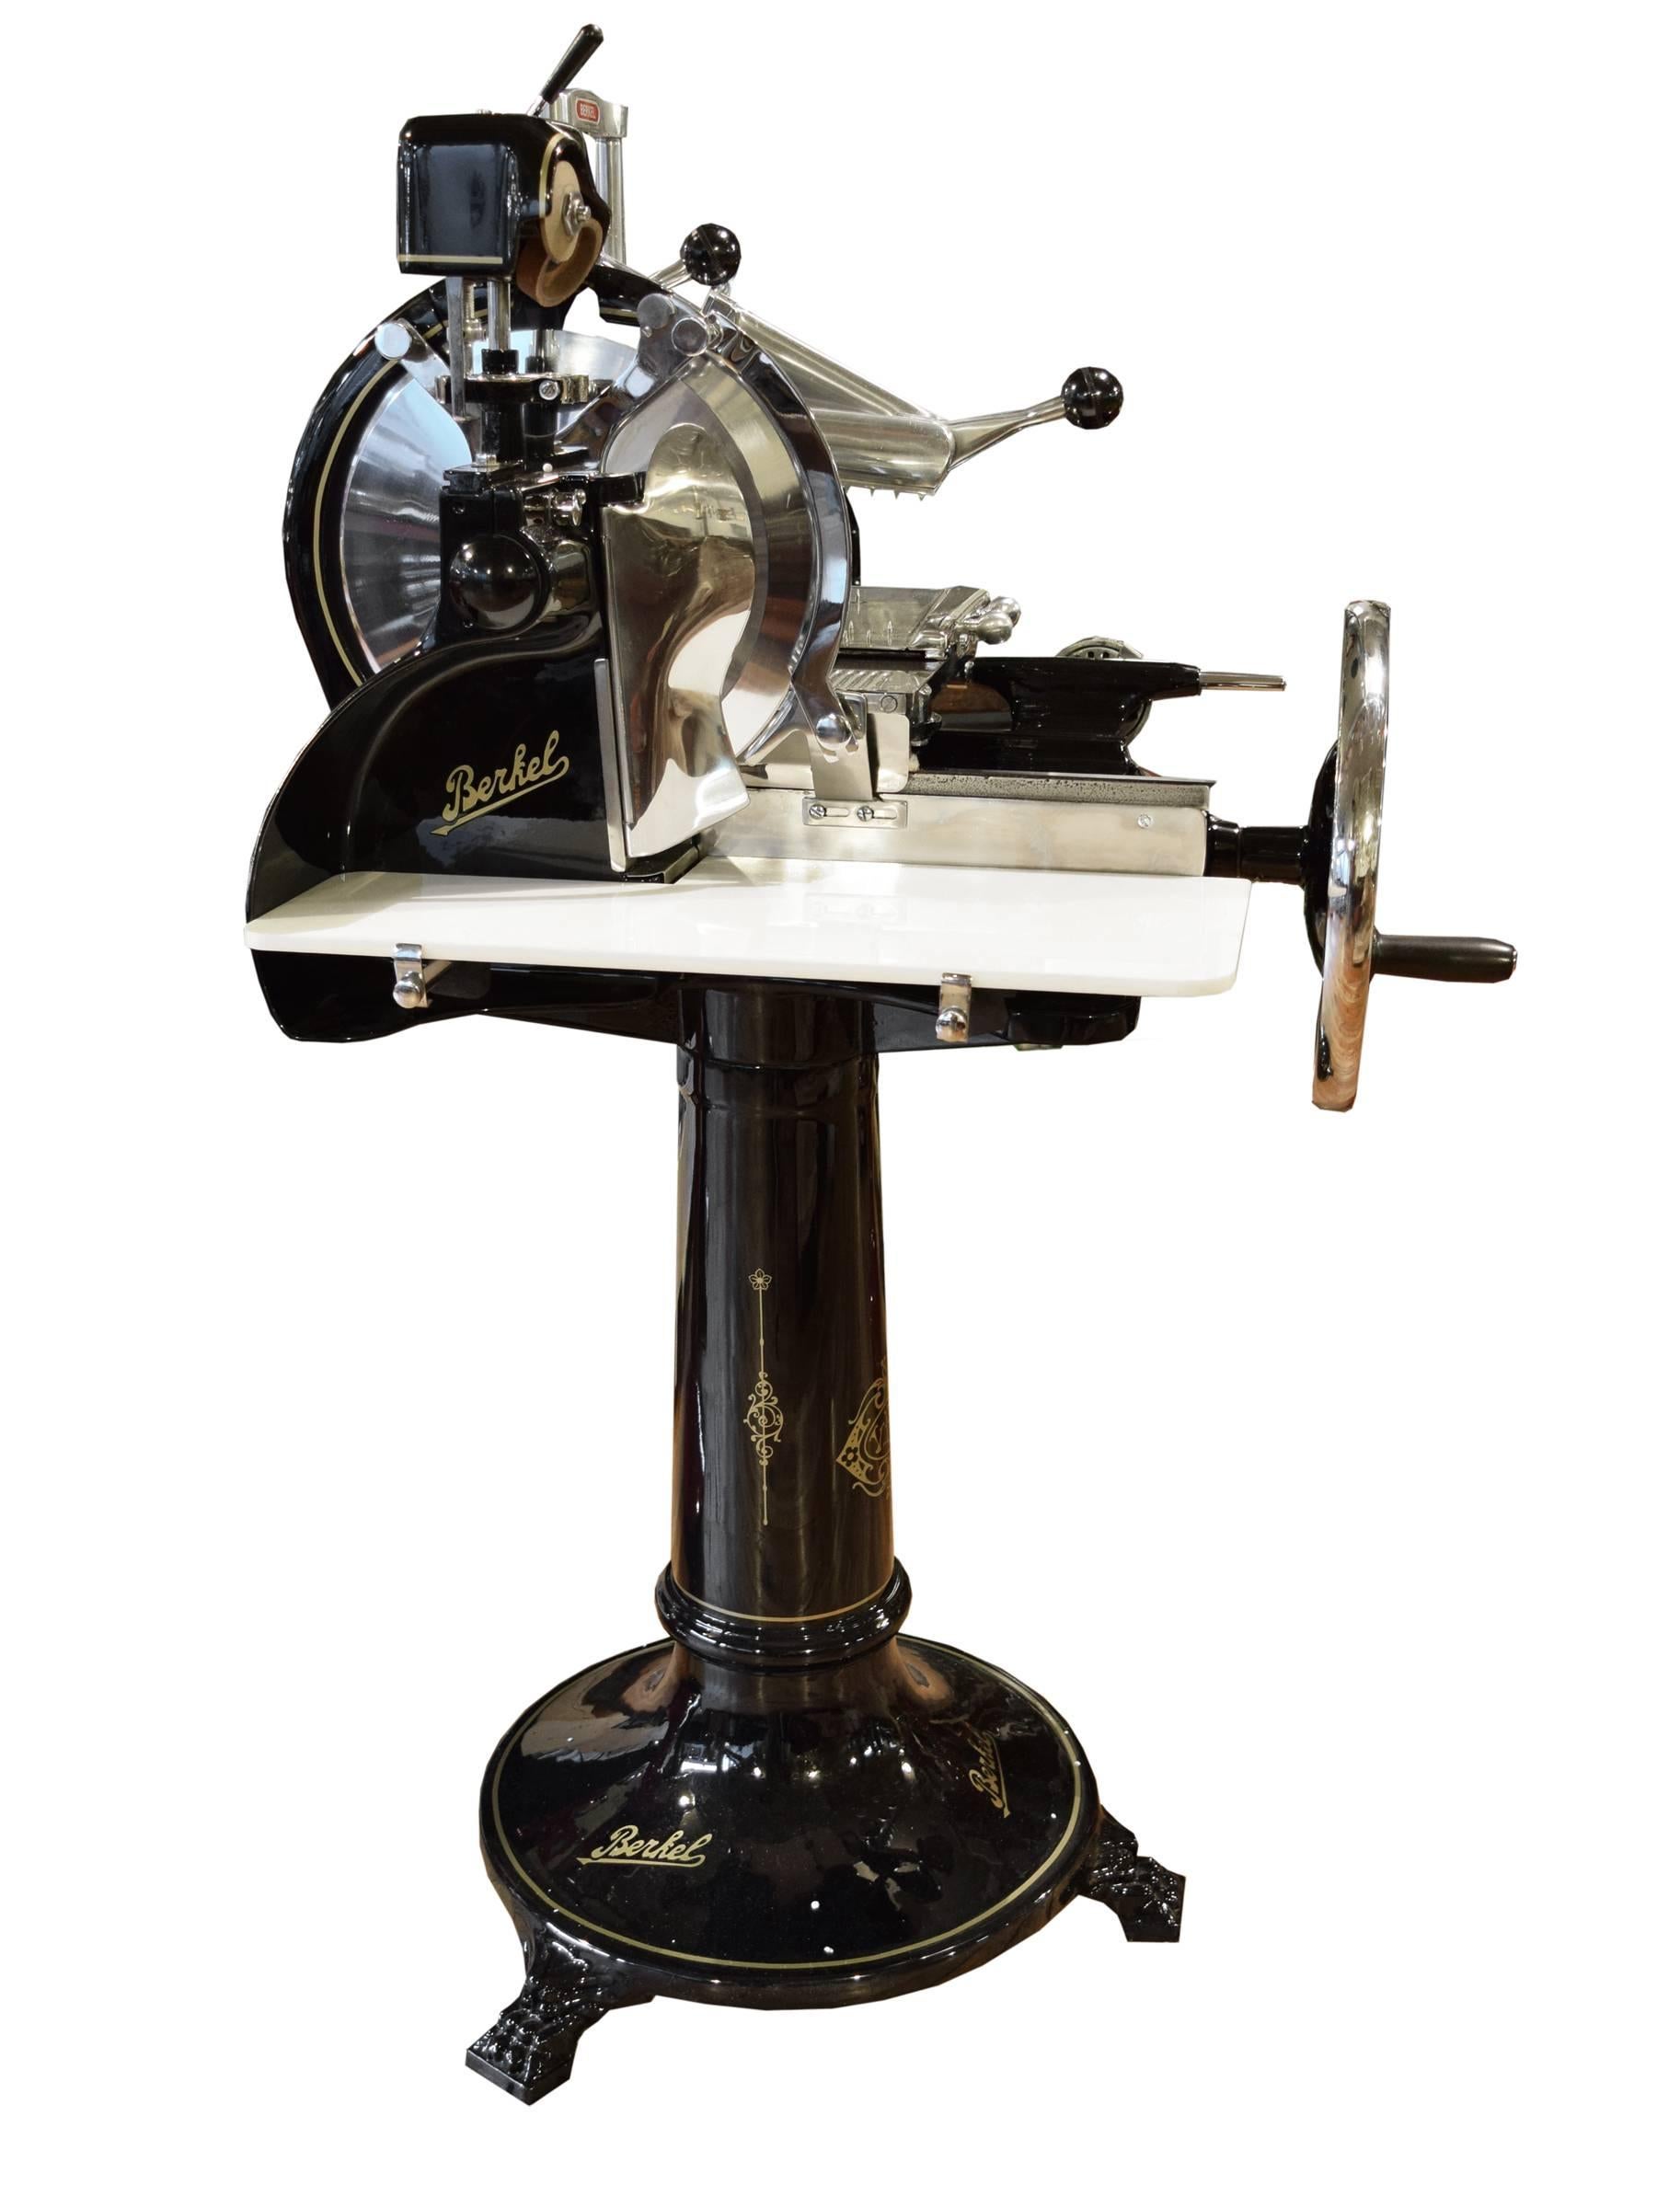 A rare Berkel model 9 meat slicer in a black high gloss enamel with gold pinstriping, manufactured in Rotterdam, Holland. This model, circa 1935, is flywheel operated and features 15 different slicing thicknesses and a blade sharpener. This slicer